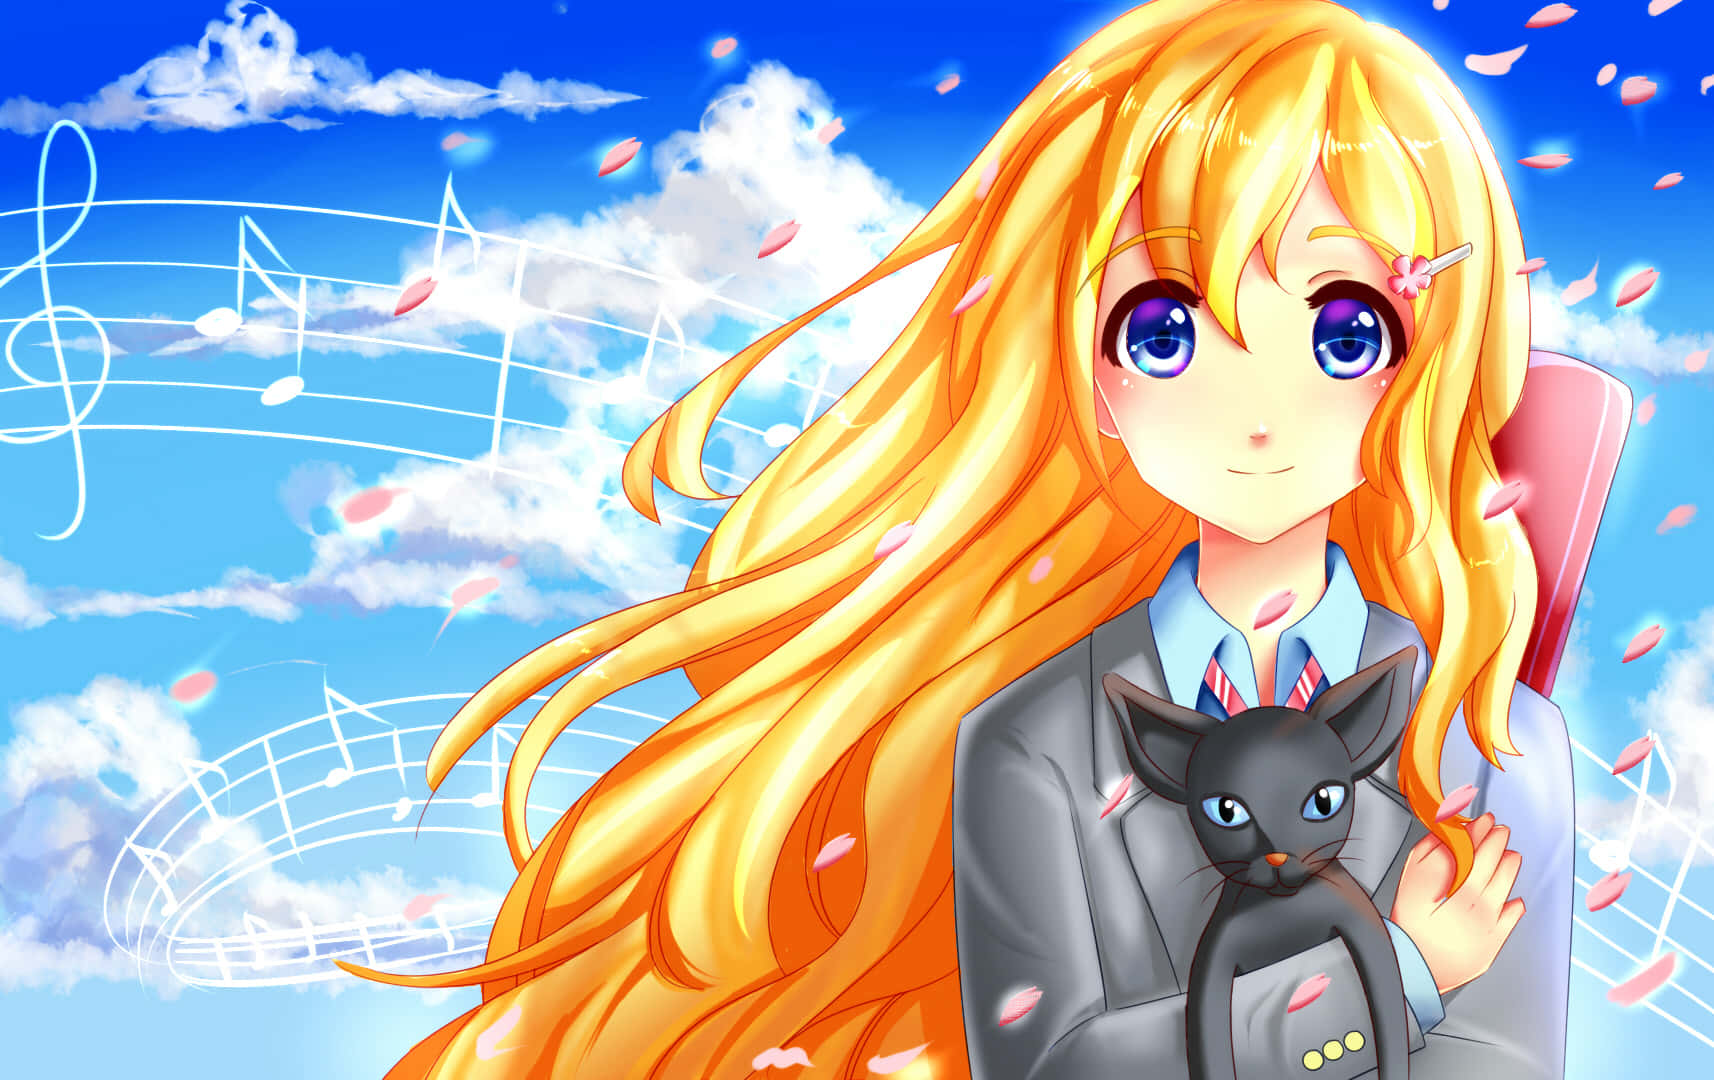 Piano prodigy Kaori Miyazono brings joy to her audiences with her vibrant performances in "Your Lie In April"